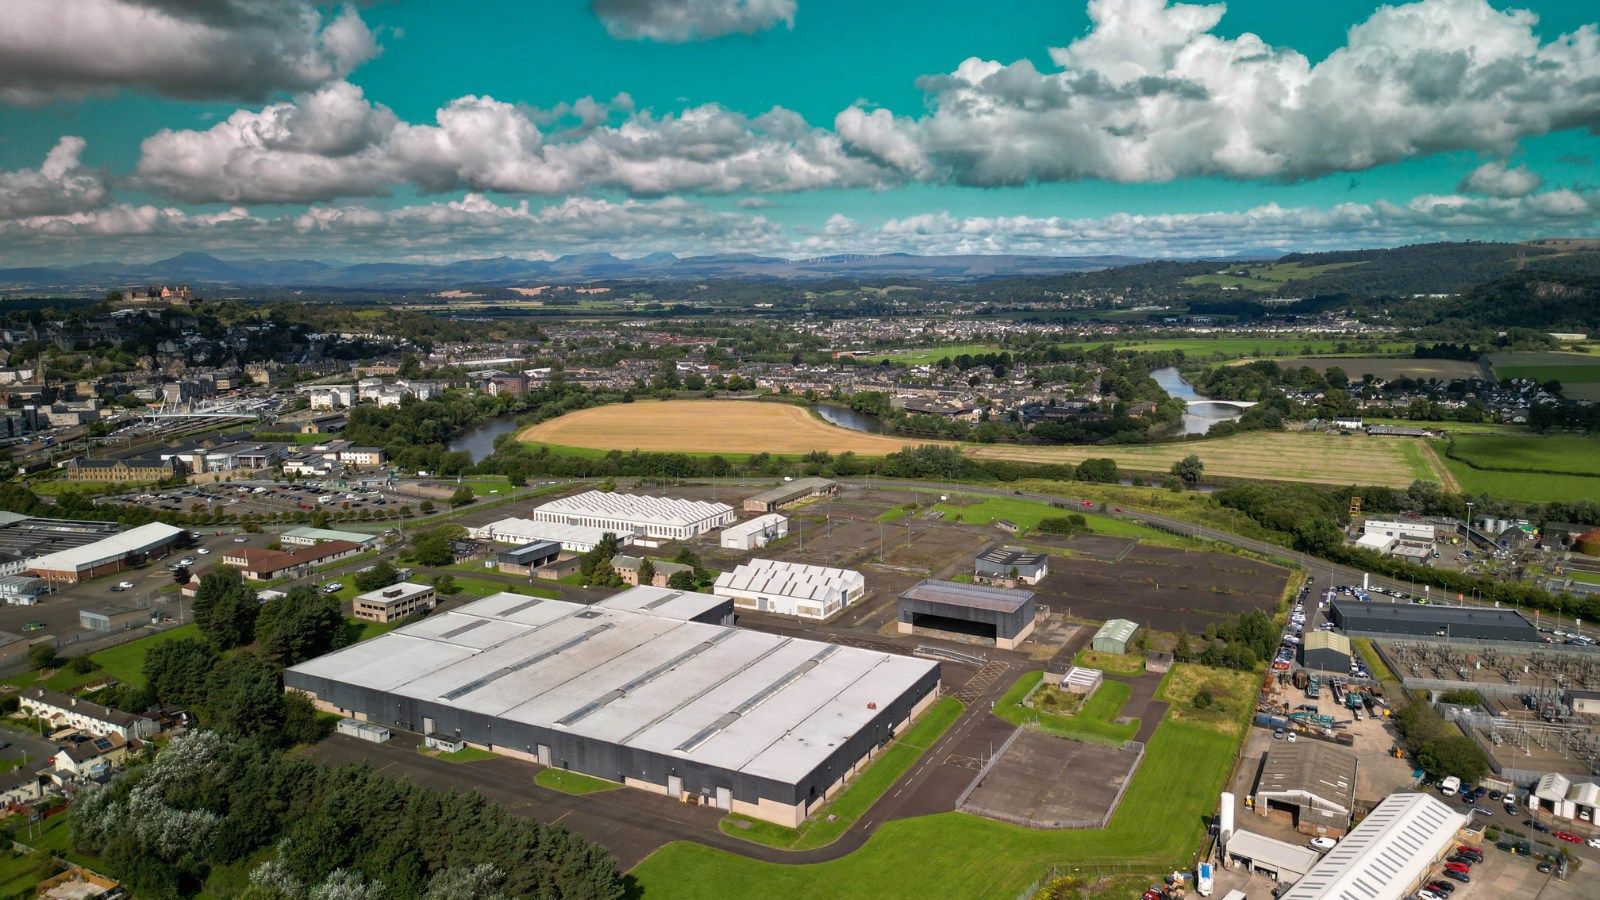 A drone shot of Stirling Studios location from above, showing a large building and fields surrounding it